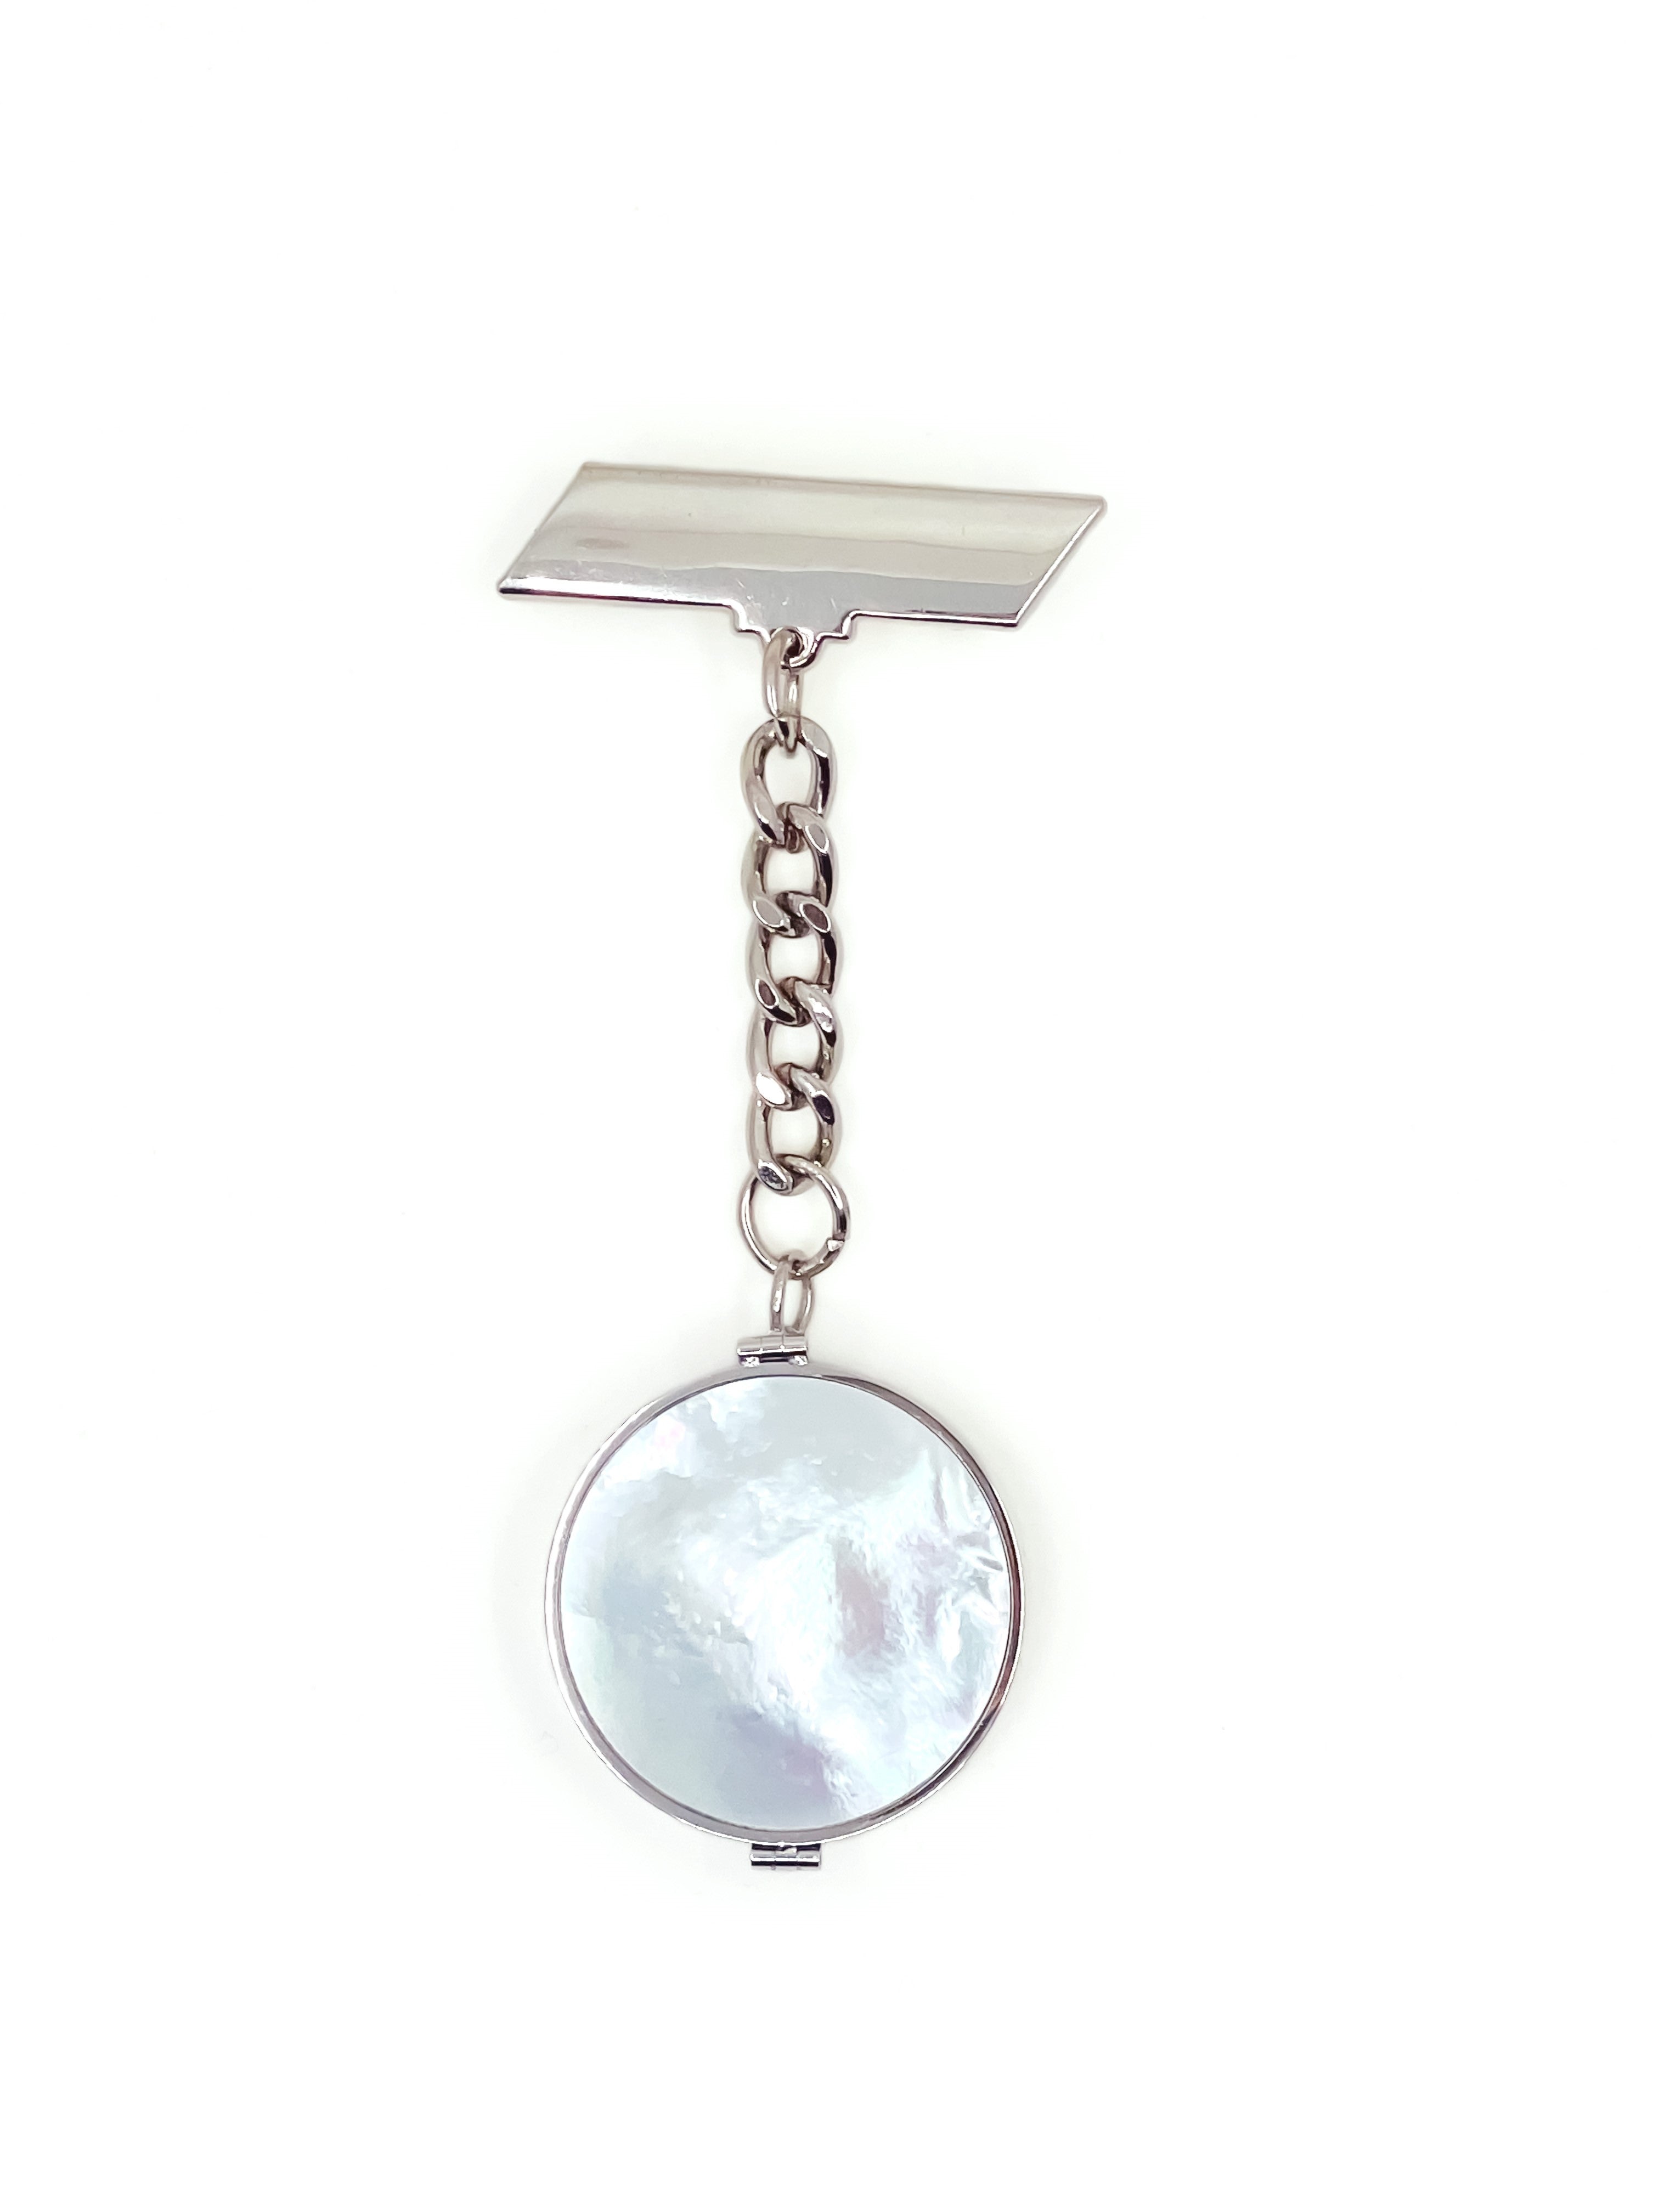 Mother of Pearl Lip Balm Fob in White Gold - getbalmy